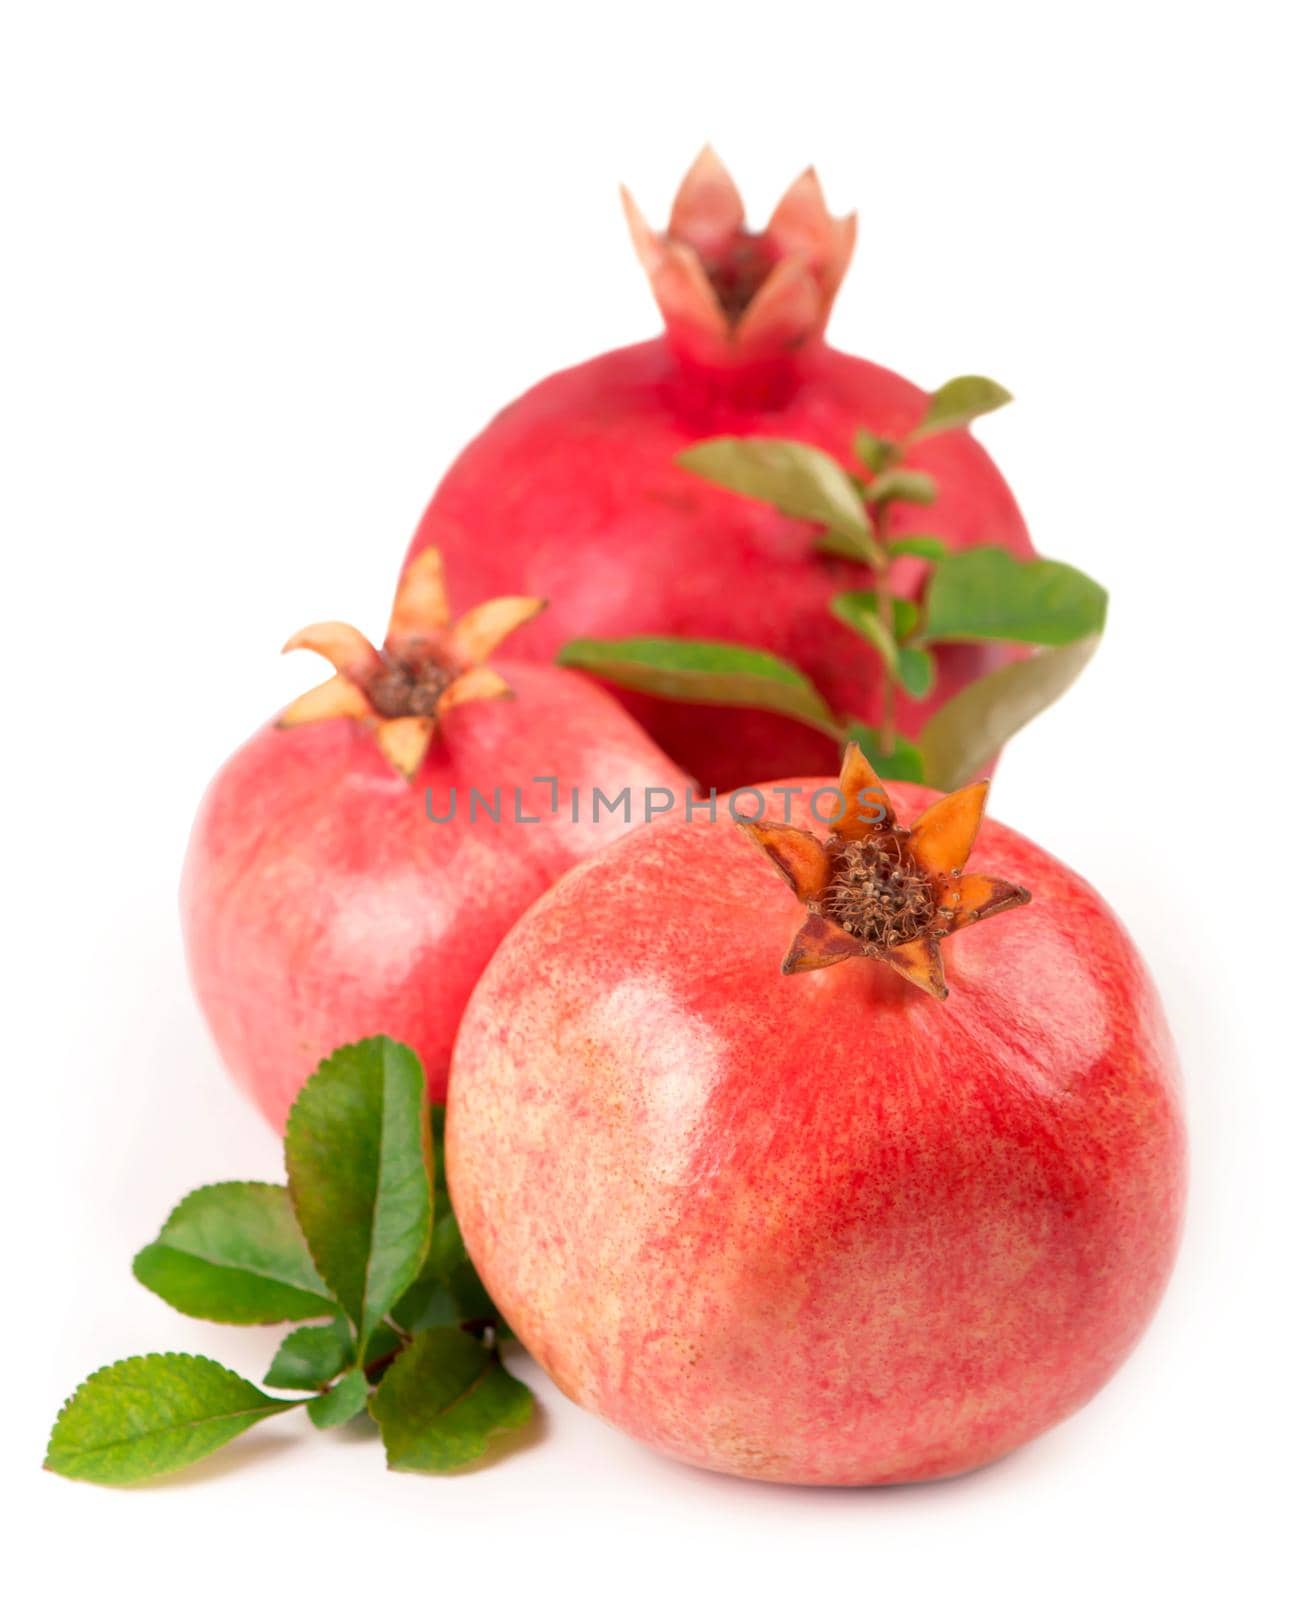 with pomegranate leaves isolated on a white background.